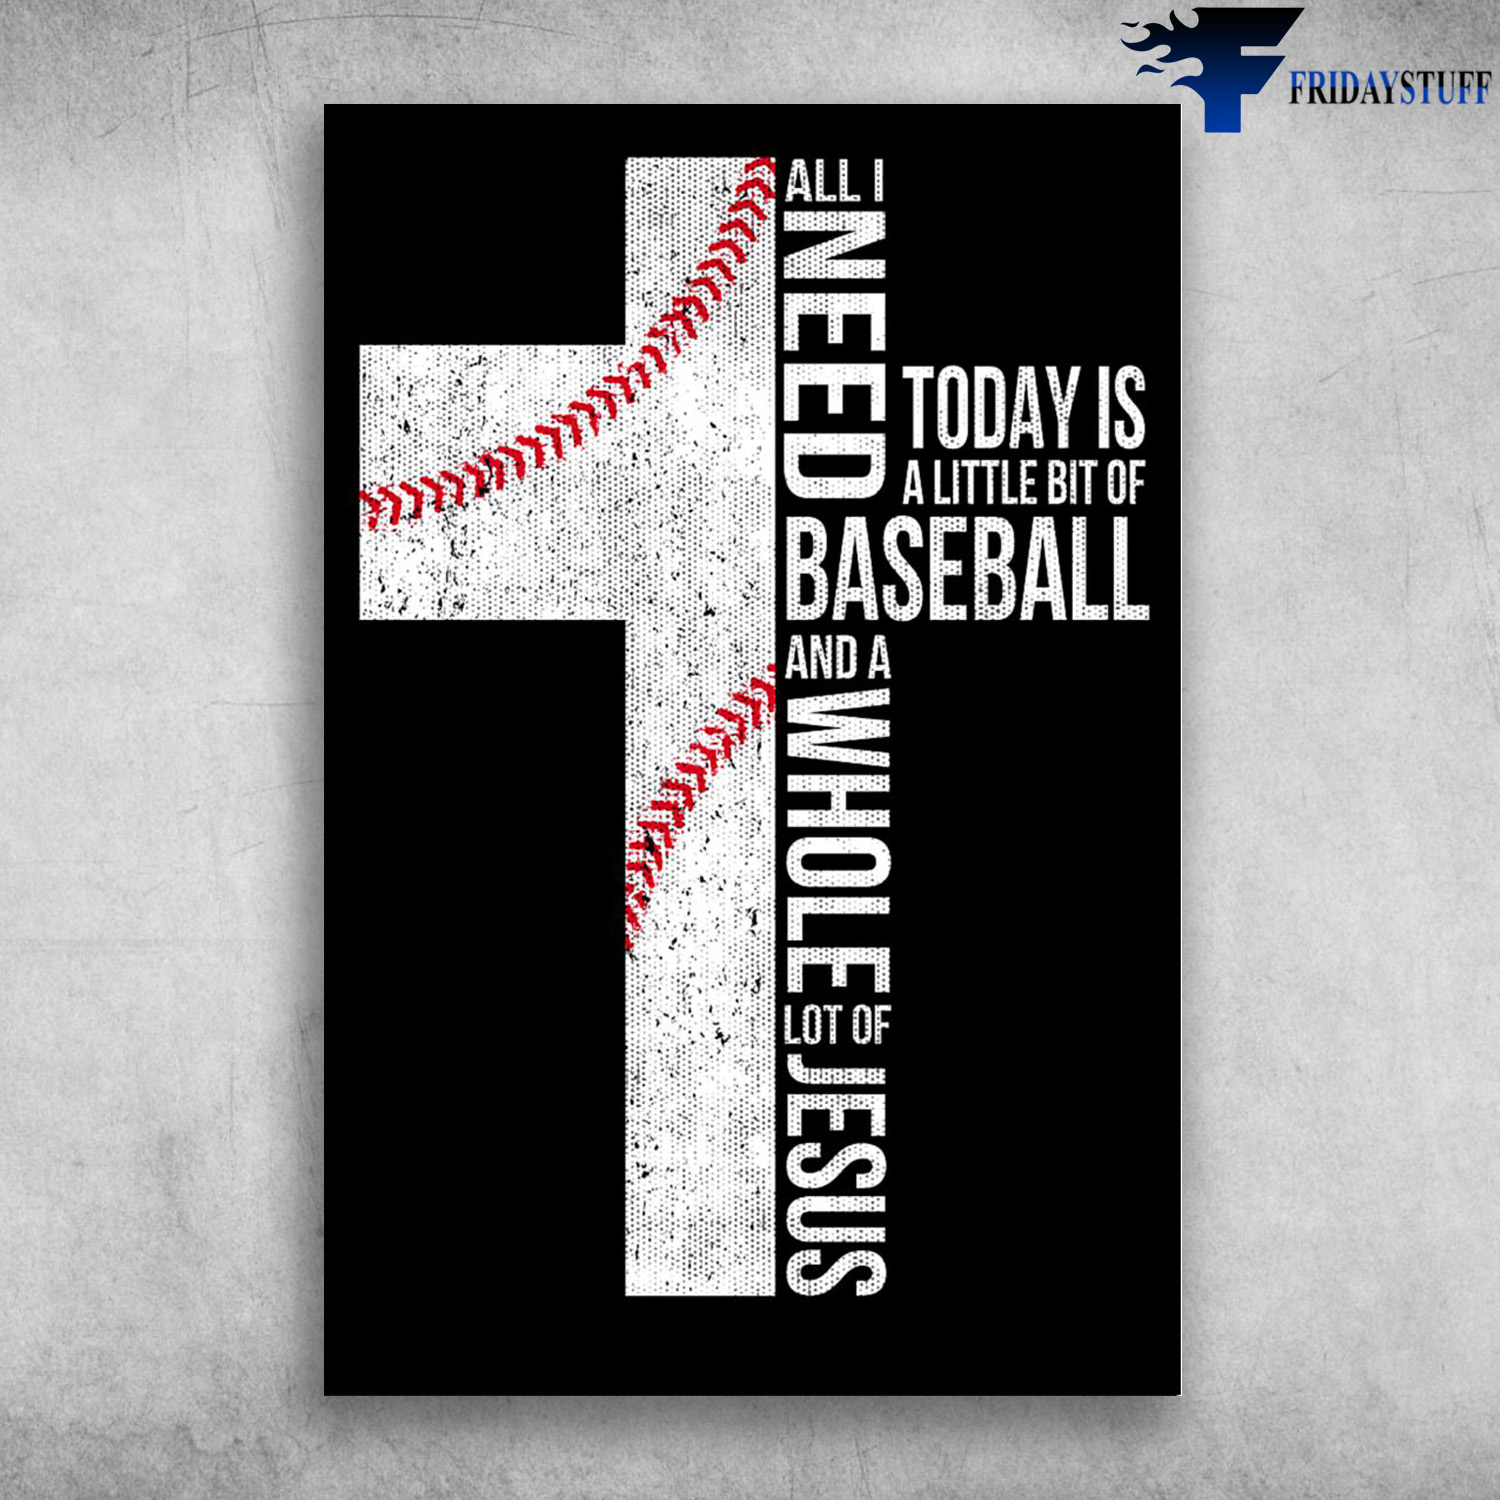 Baseball Flag - All I Need Today Is A Little Bit Of Baseball, And A Whole Lot Of Jesus